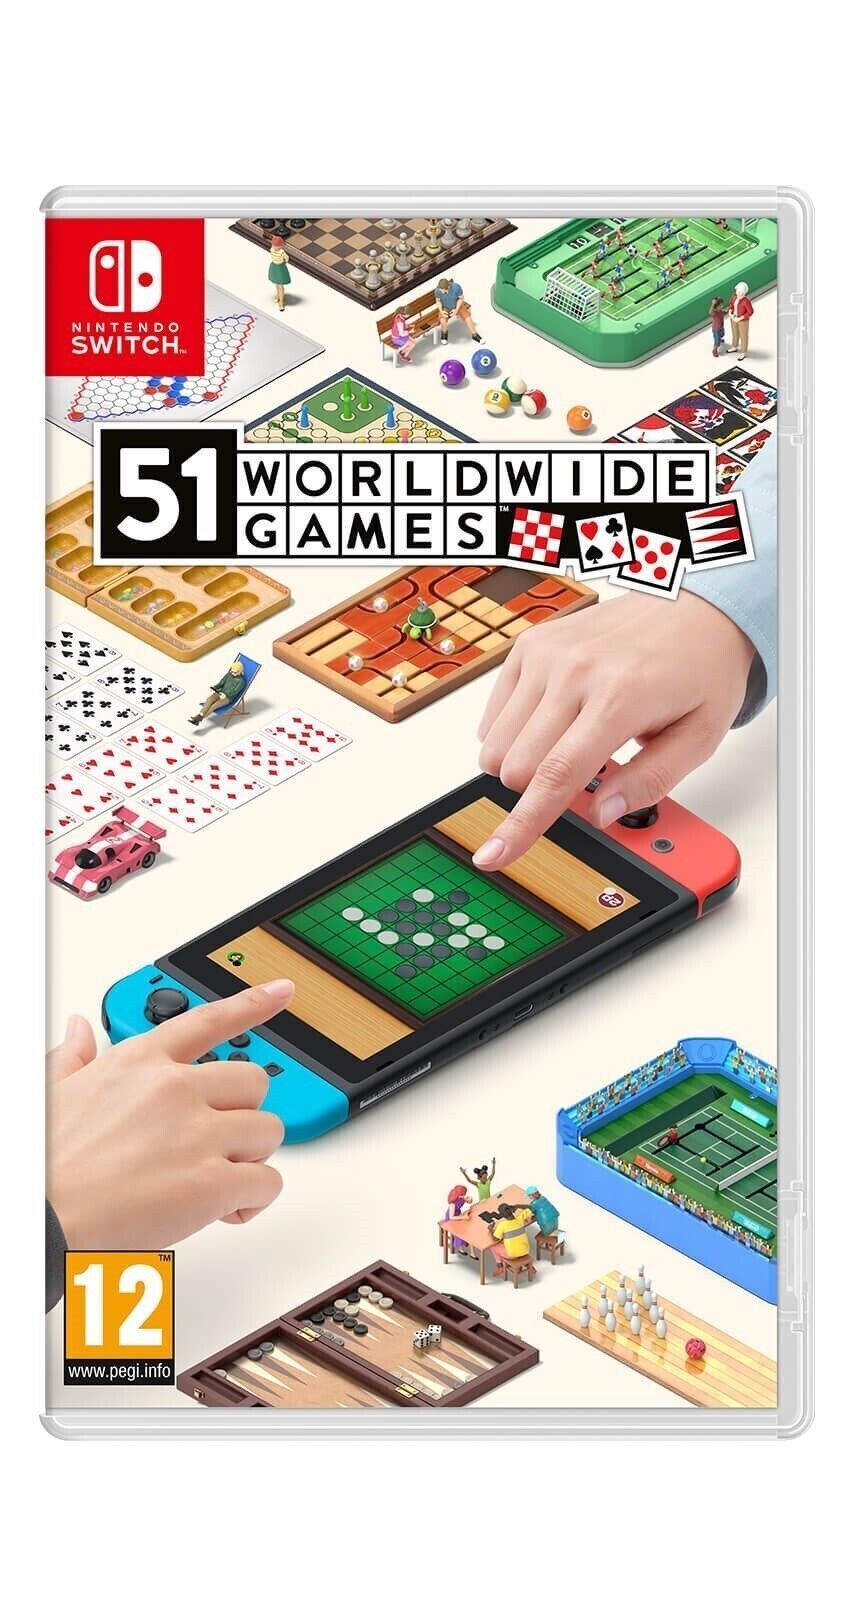 Nswitch 51 Worldwide Games